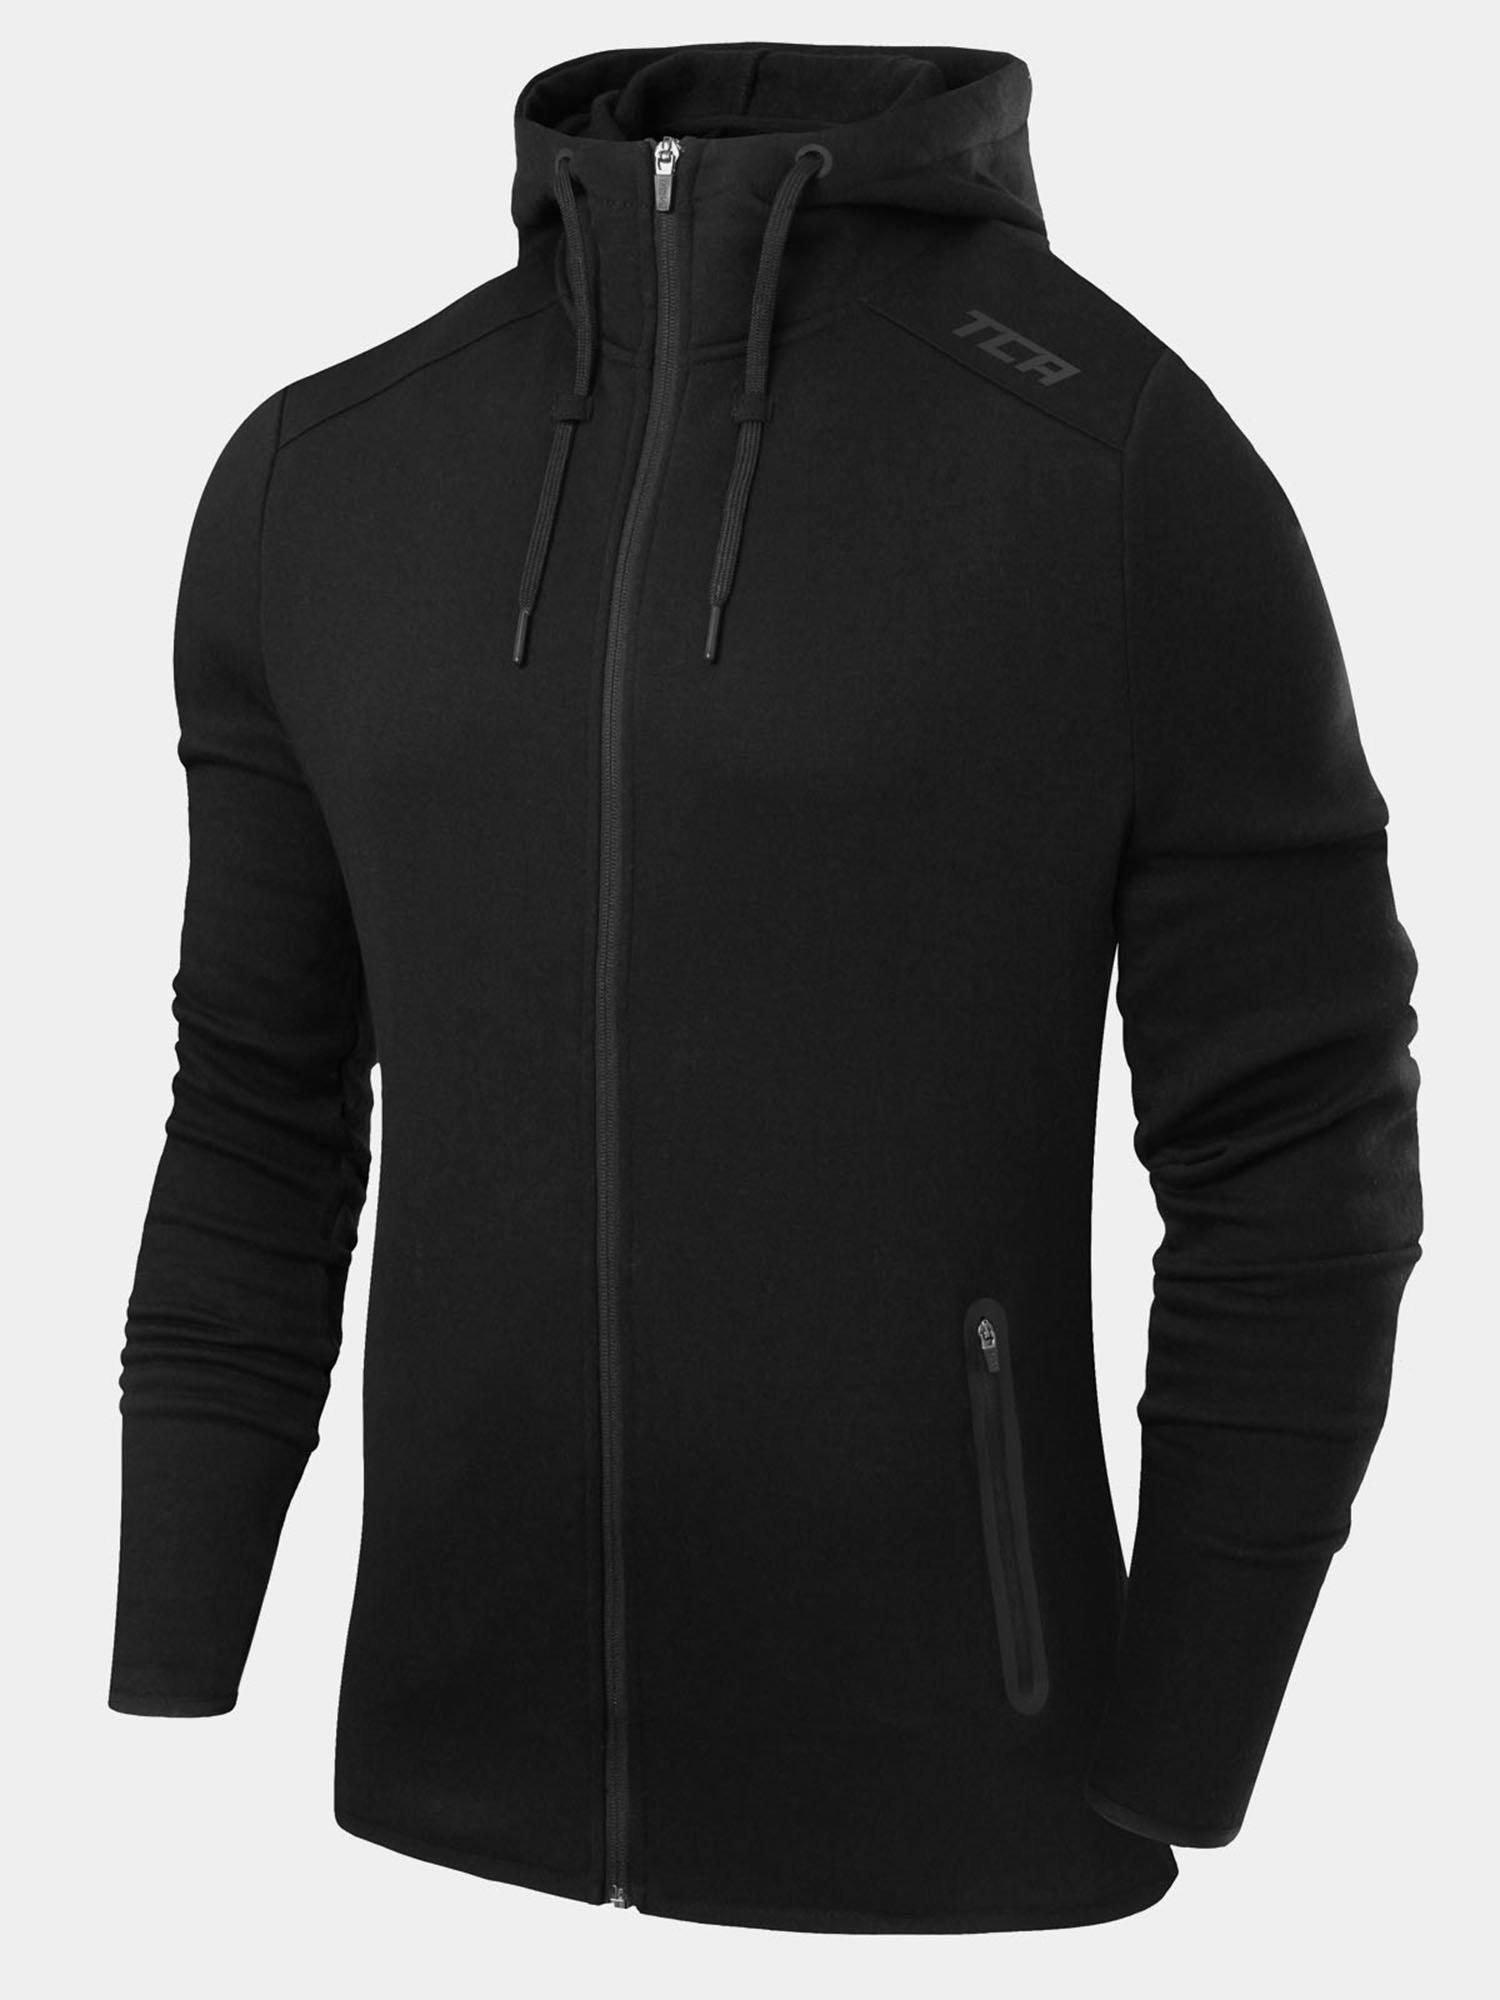 Revolution Tech Gym Running Hoodie for Men with Zip Pockets